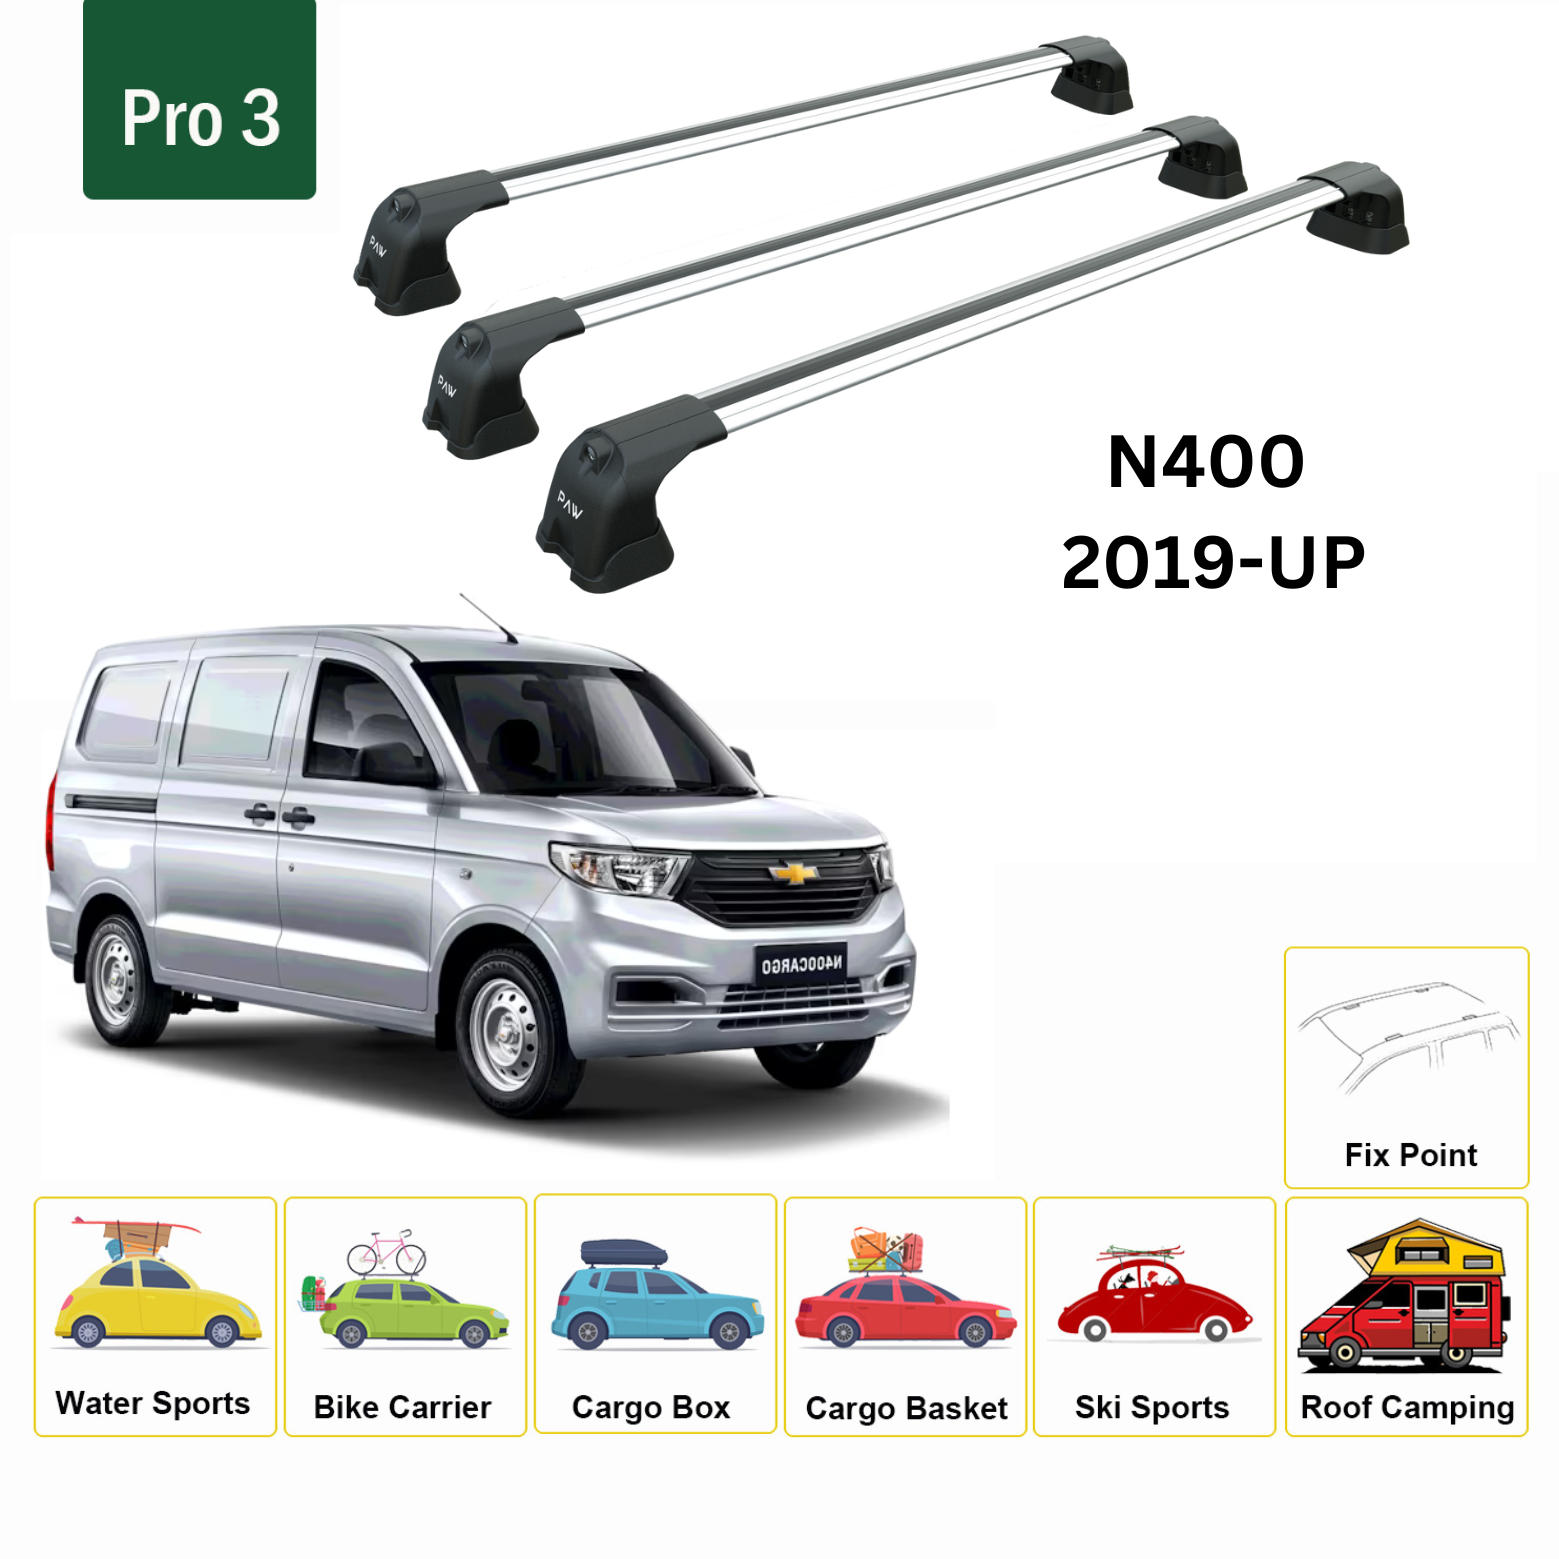 For Chevrolet N400 2019-Up Roof Rack Cross Bars Metal Bracket Fix Point 3 Qty. Alu Silver